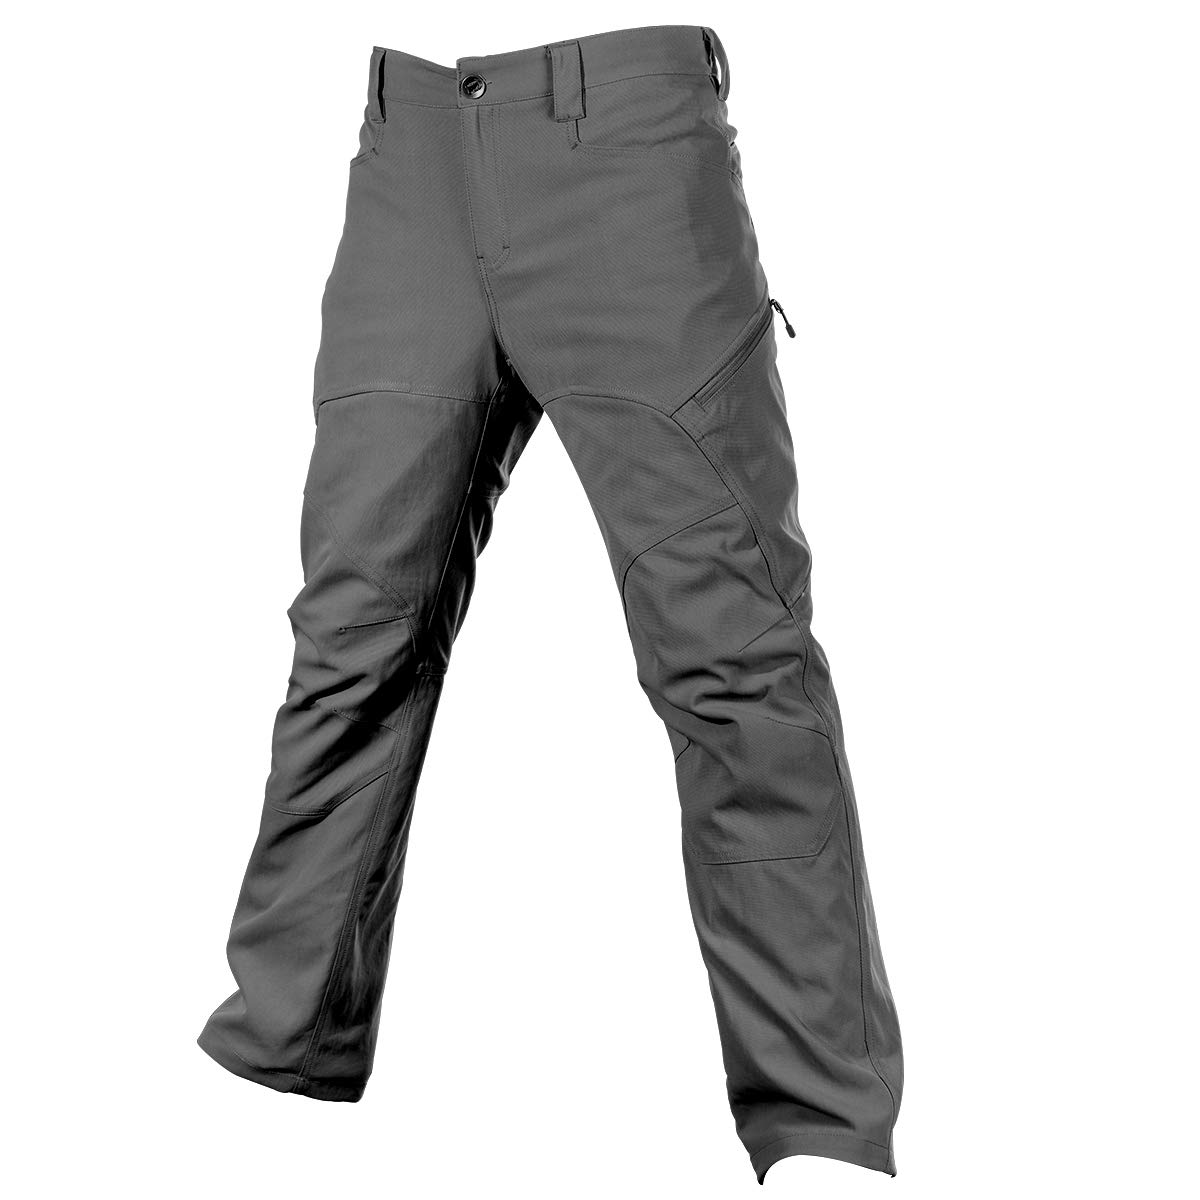 FREE SOLDIER Men’s Tactical Pants front angle